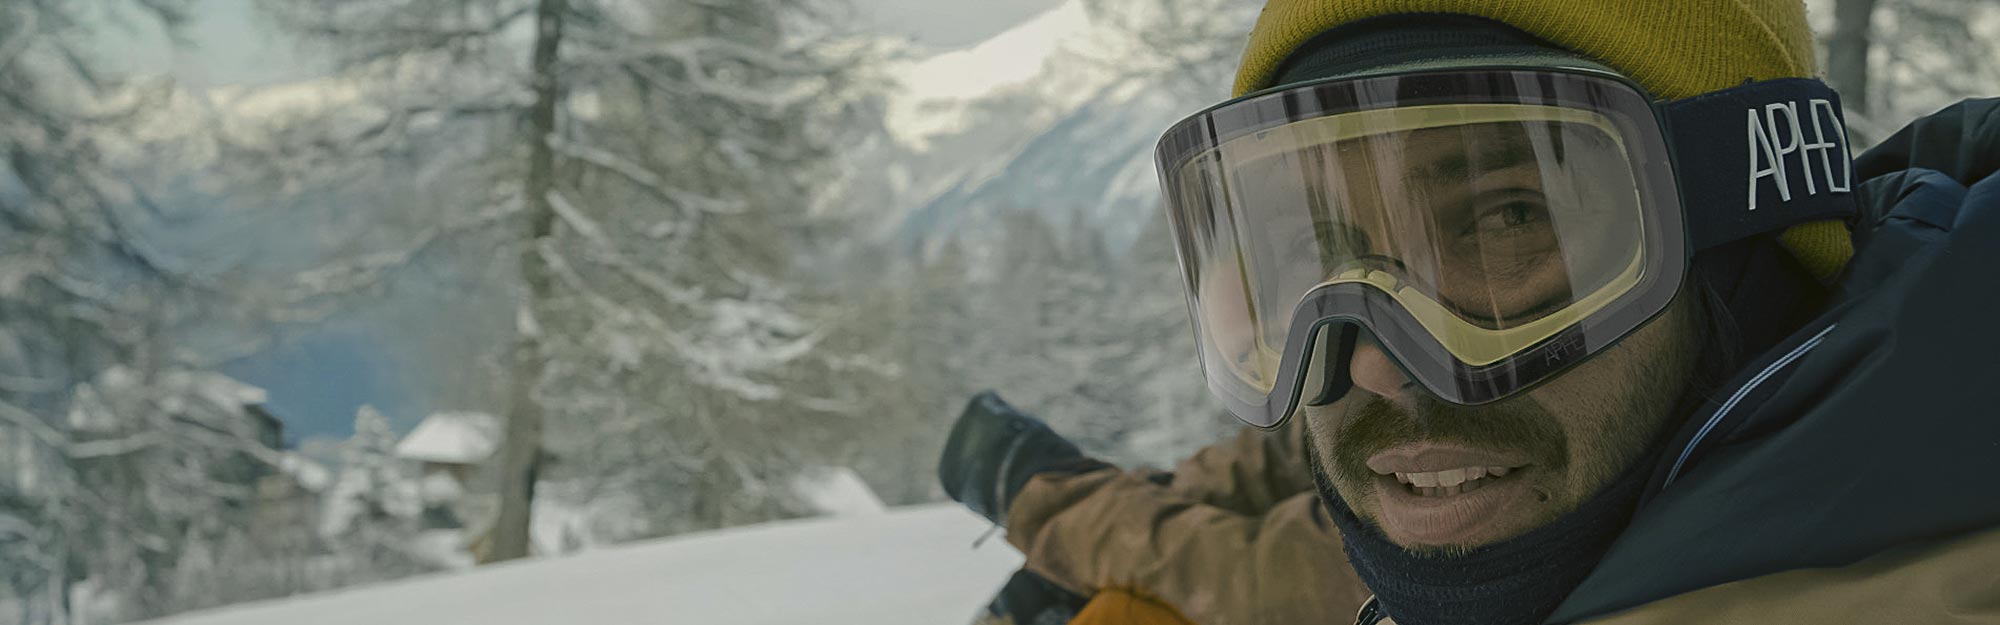 Transparent Ski Goggles collection for whiteout days or night - Aphex